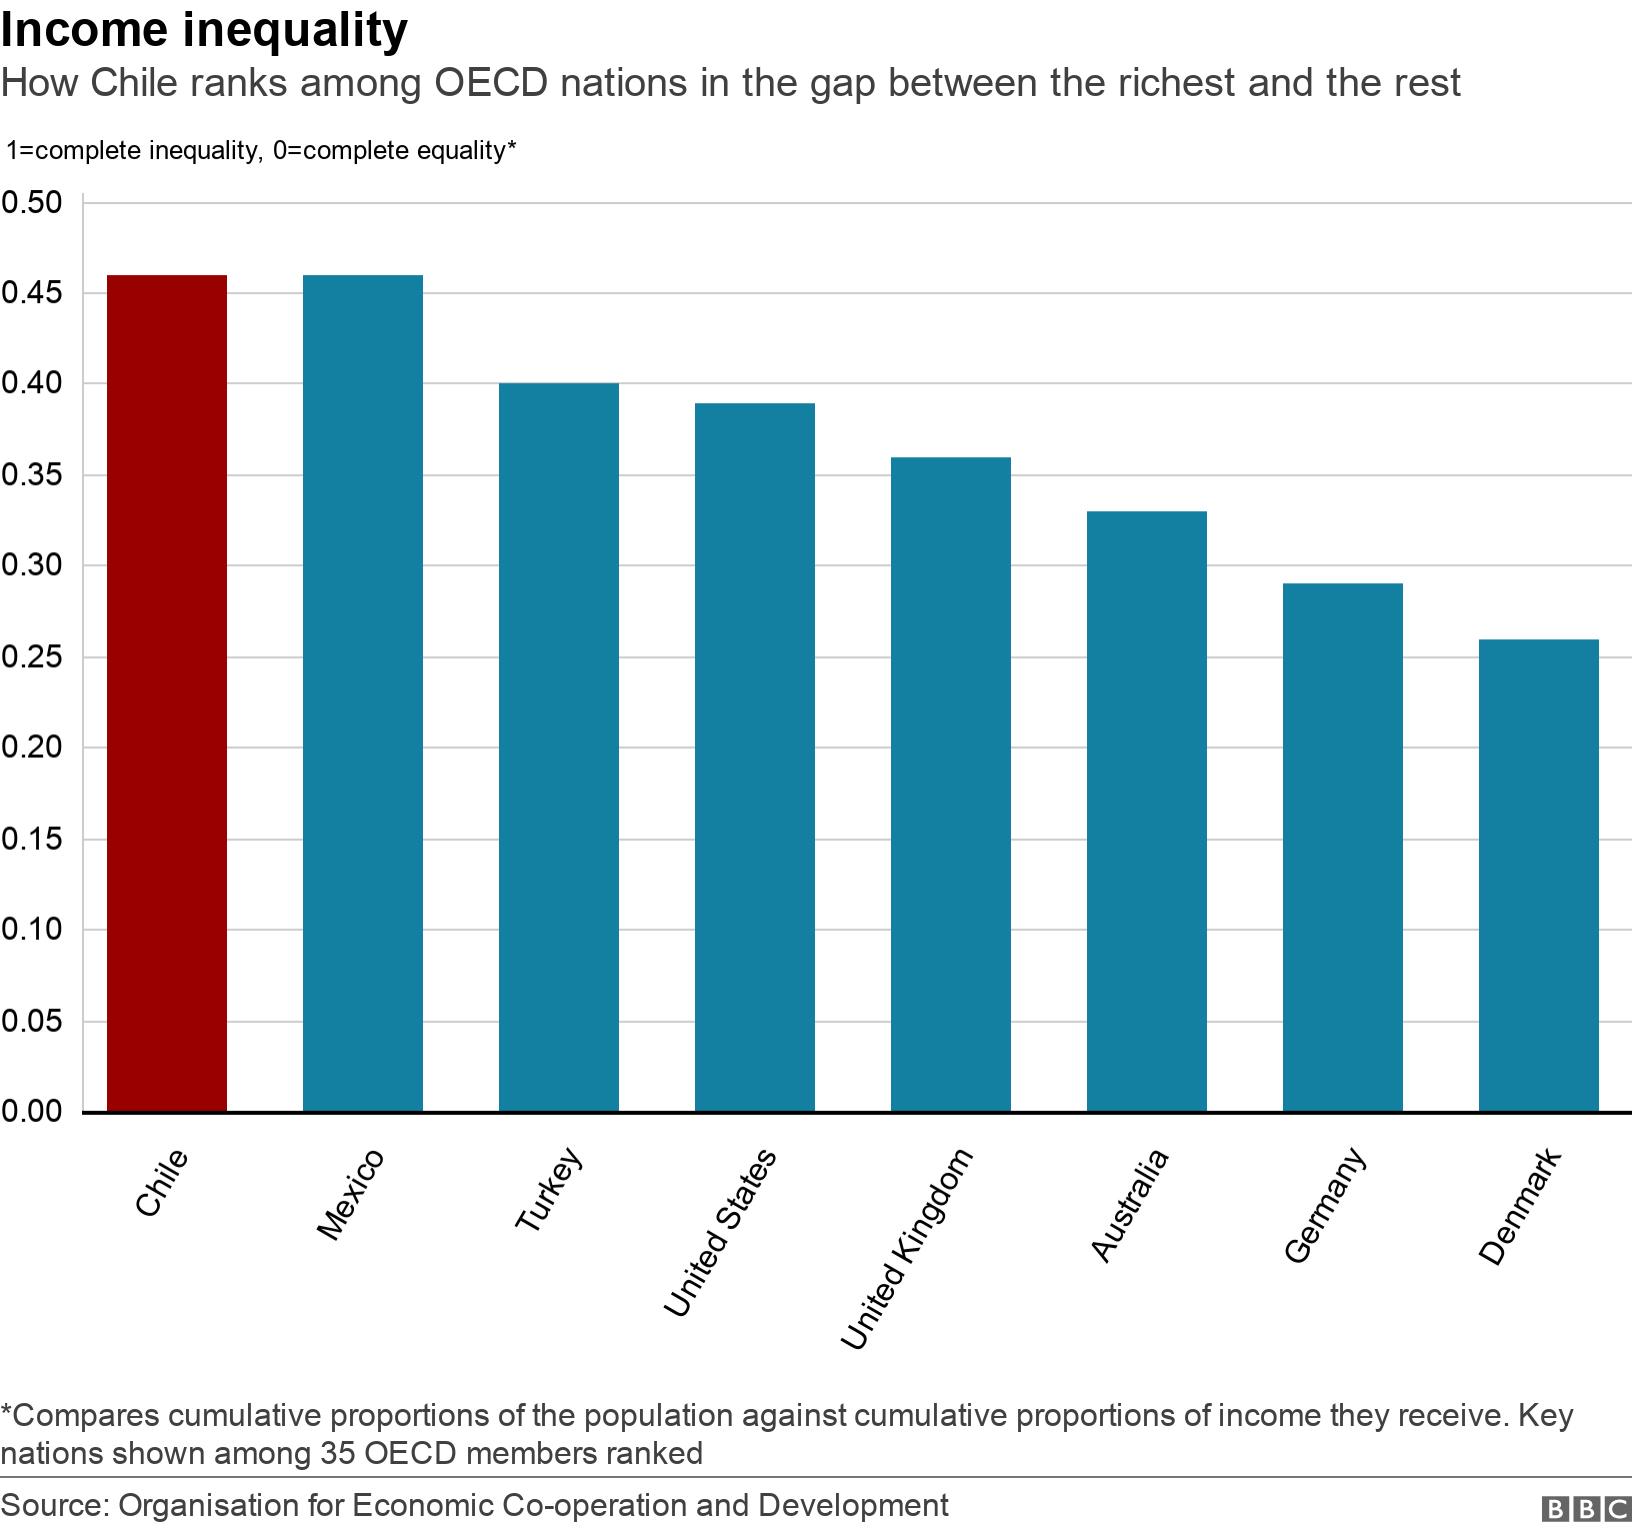 Income inequality. How Chile ranks among OECD nations in the gap between the richest and the rest.  *Compares  cumulative proportions of the population against cumulative proportions of income they receive. Key nations shown among 35 OECD members ranked.